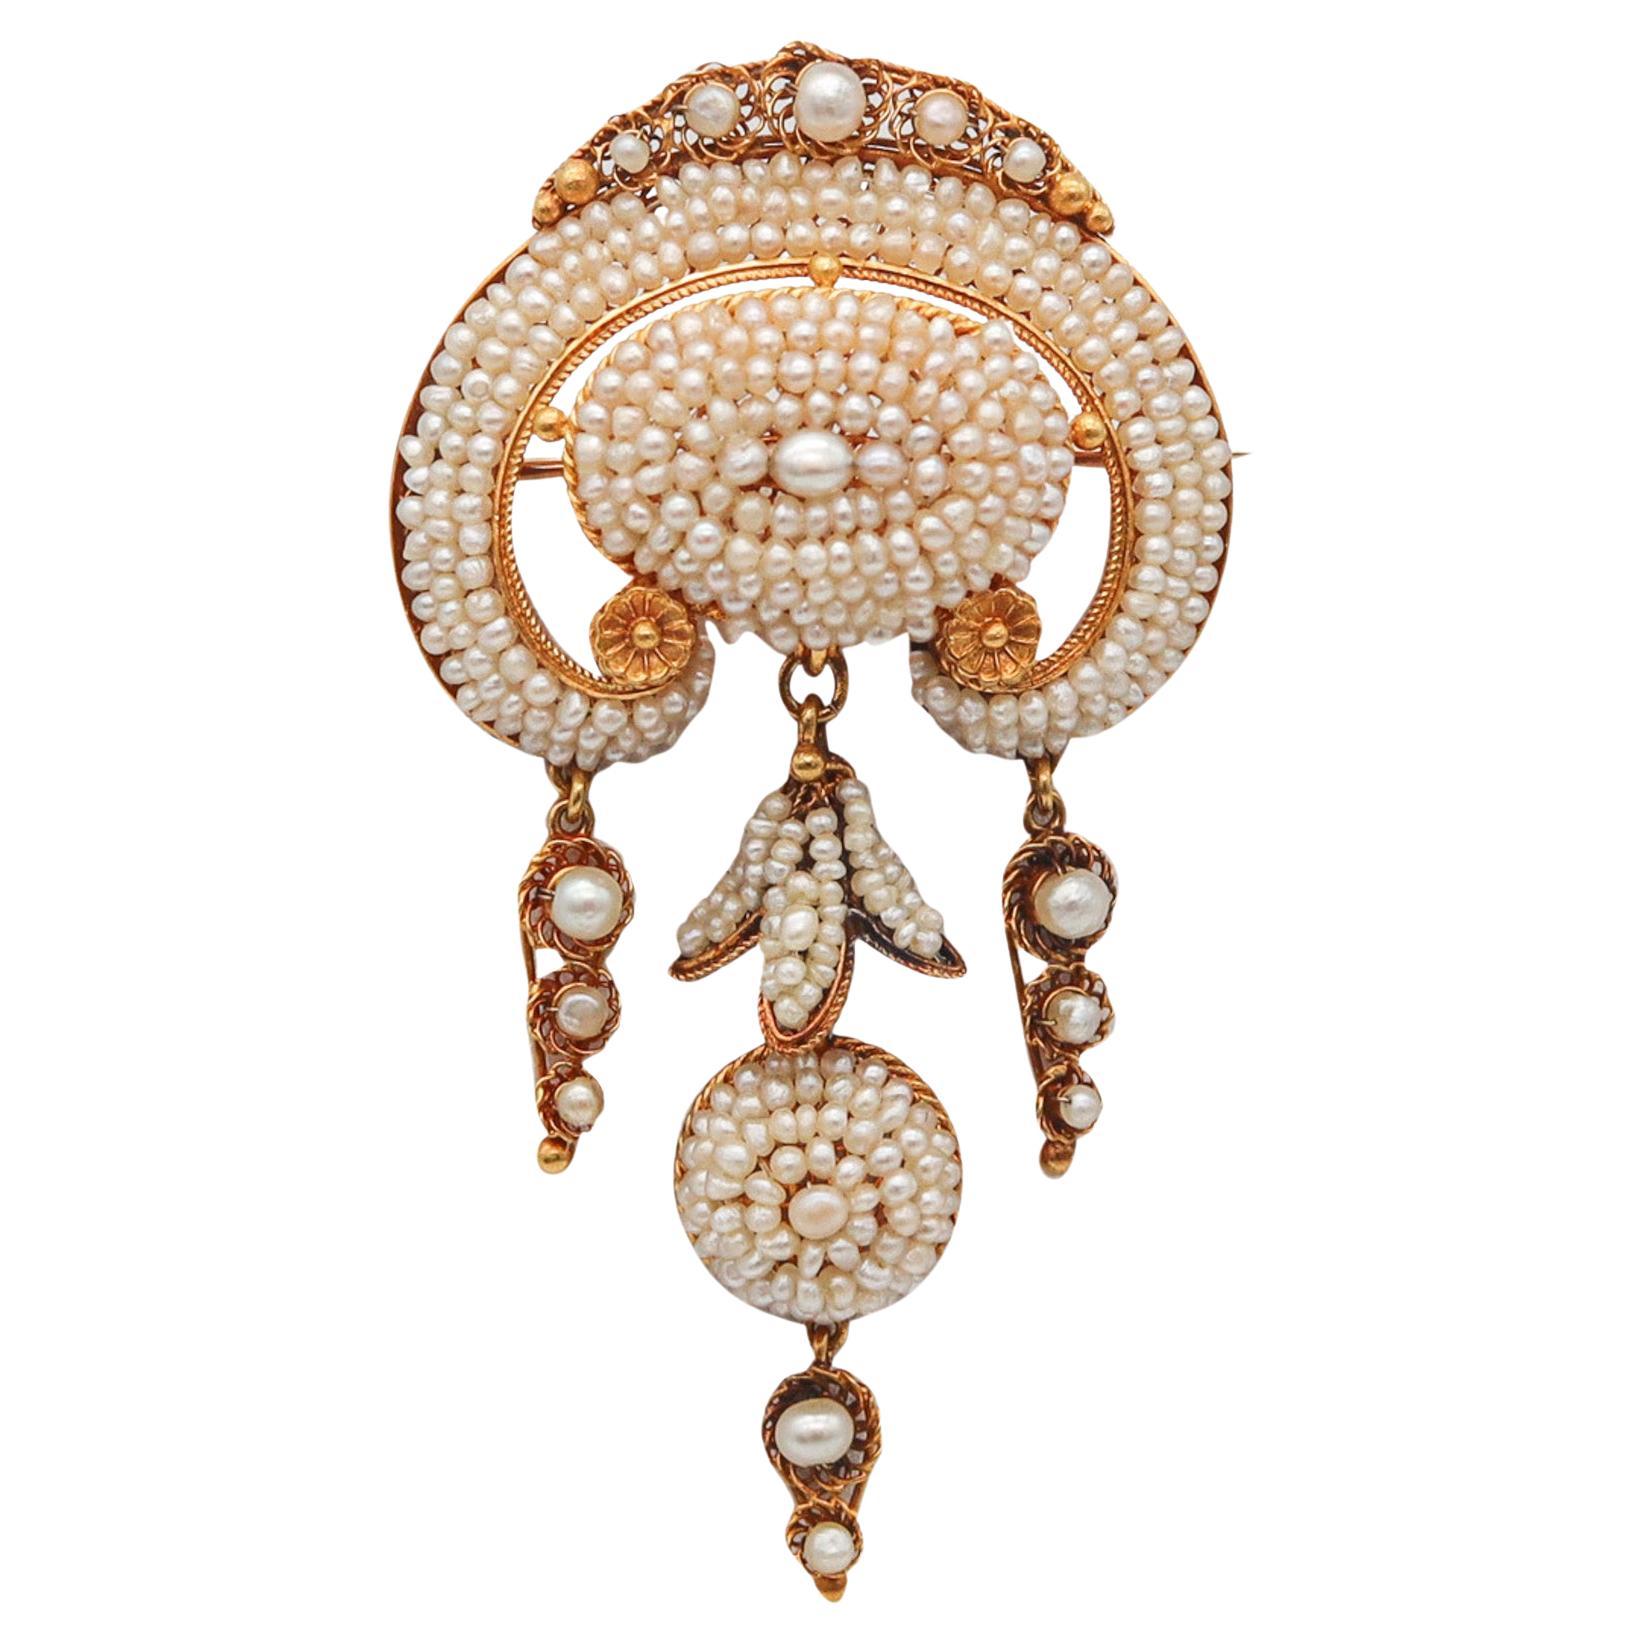 Portuguese Iberian 1850 Filigree Brooch In 21Kt Yellow Gold With Seed Pearls For Sale